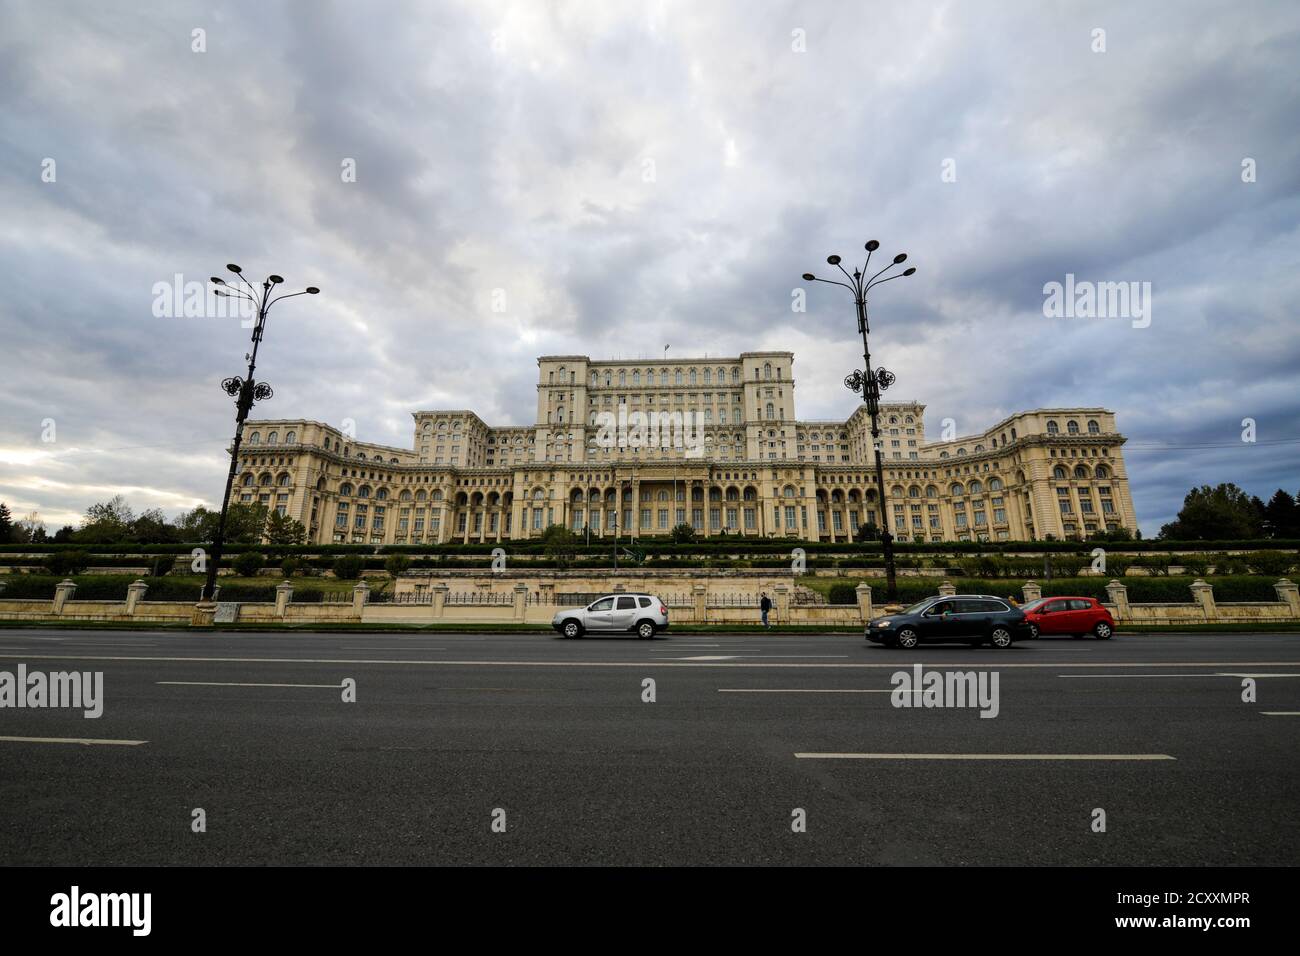 Bucharest, Romania - September 30, 2020: The Palace of Parliament building in Bucharest as seen from Piata Constitutiei (Constitution Square). Stock Photo